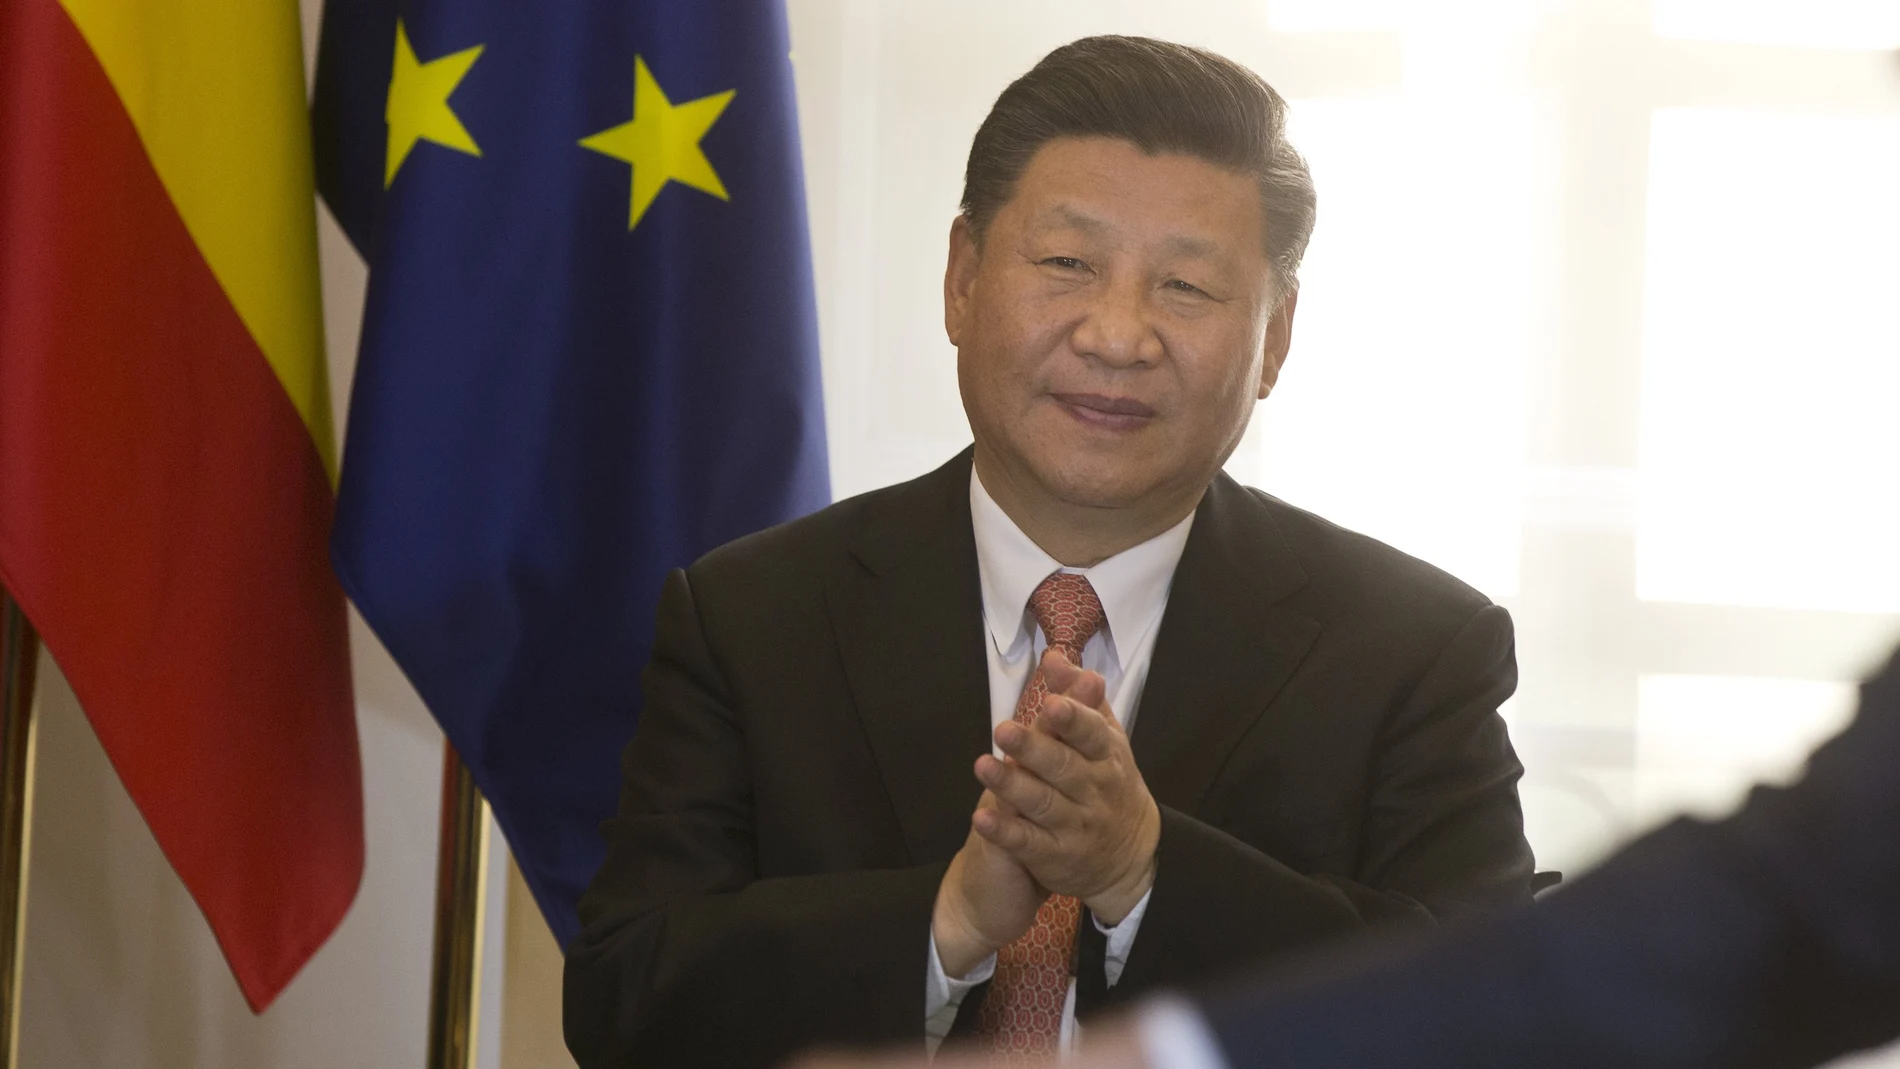 Chinese President Xi Jinping applauds during a signing ceremony with Spain at the Moncloa Palace in Madrid, Spain.